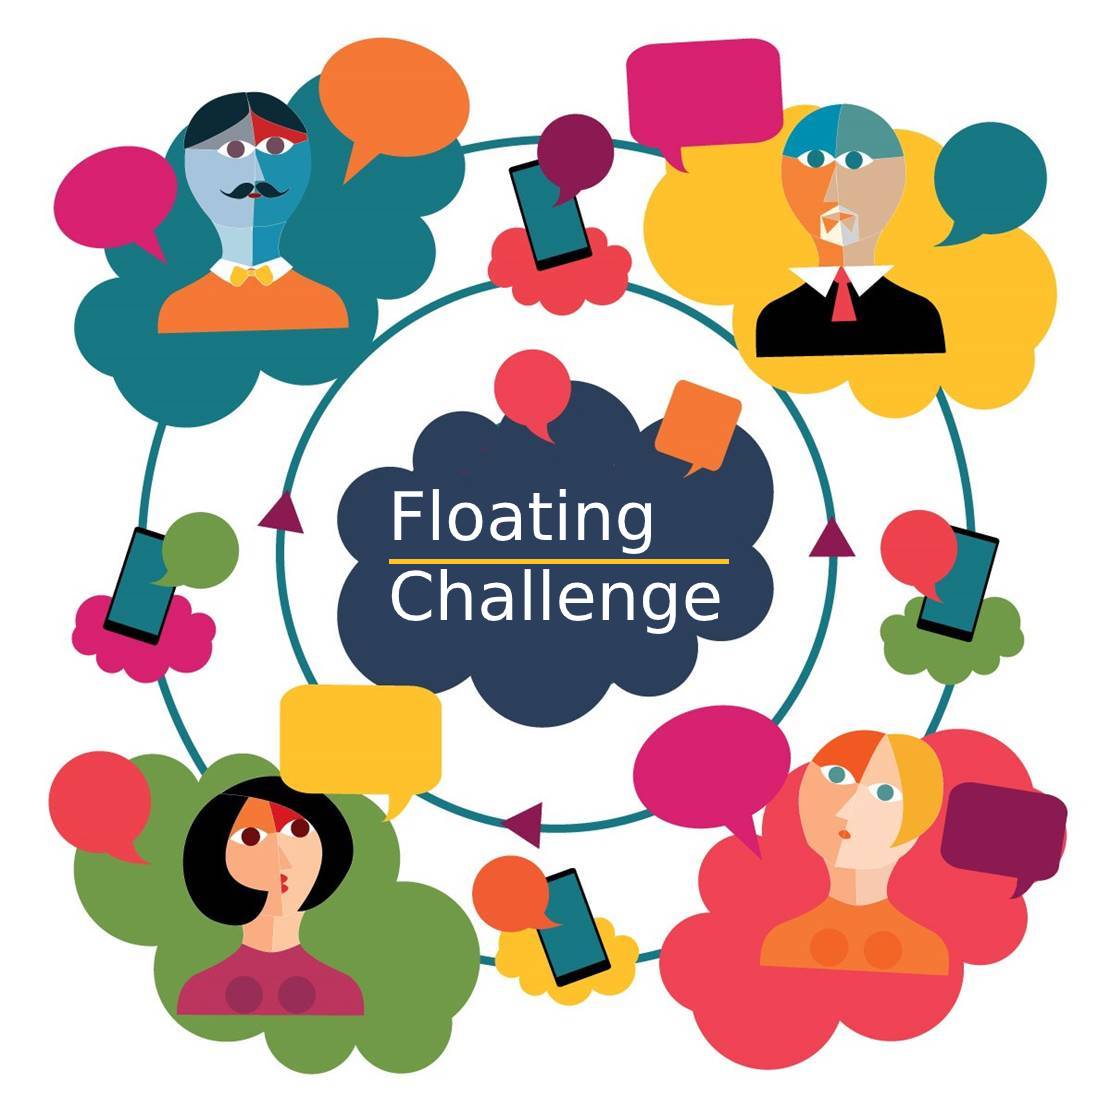 The Floating Challenge